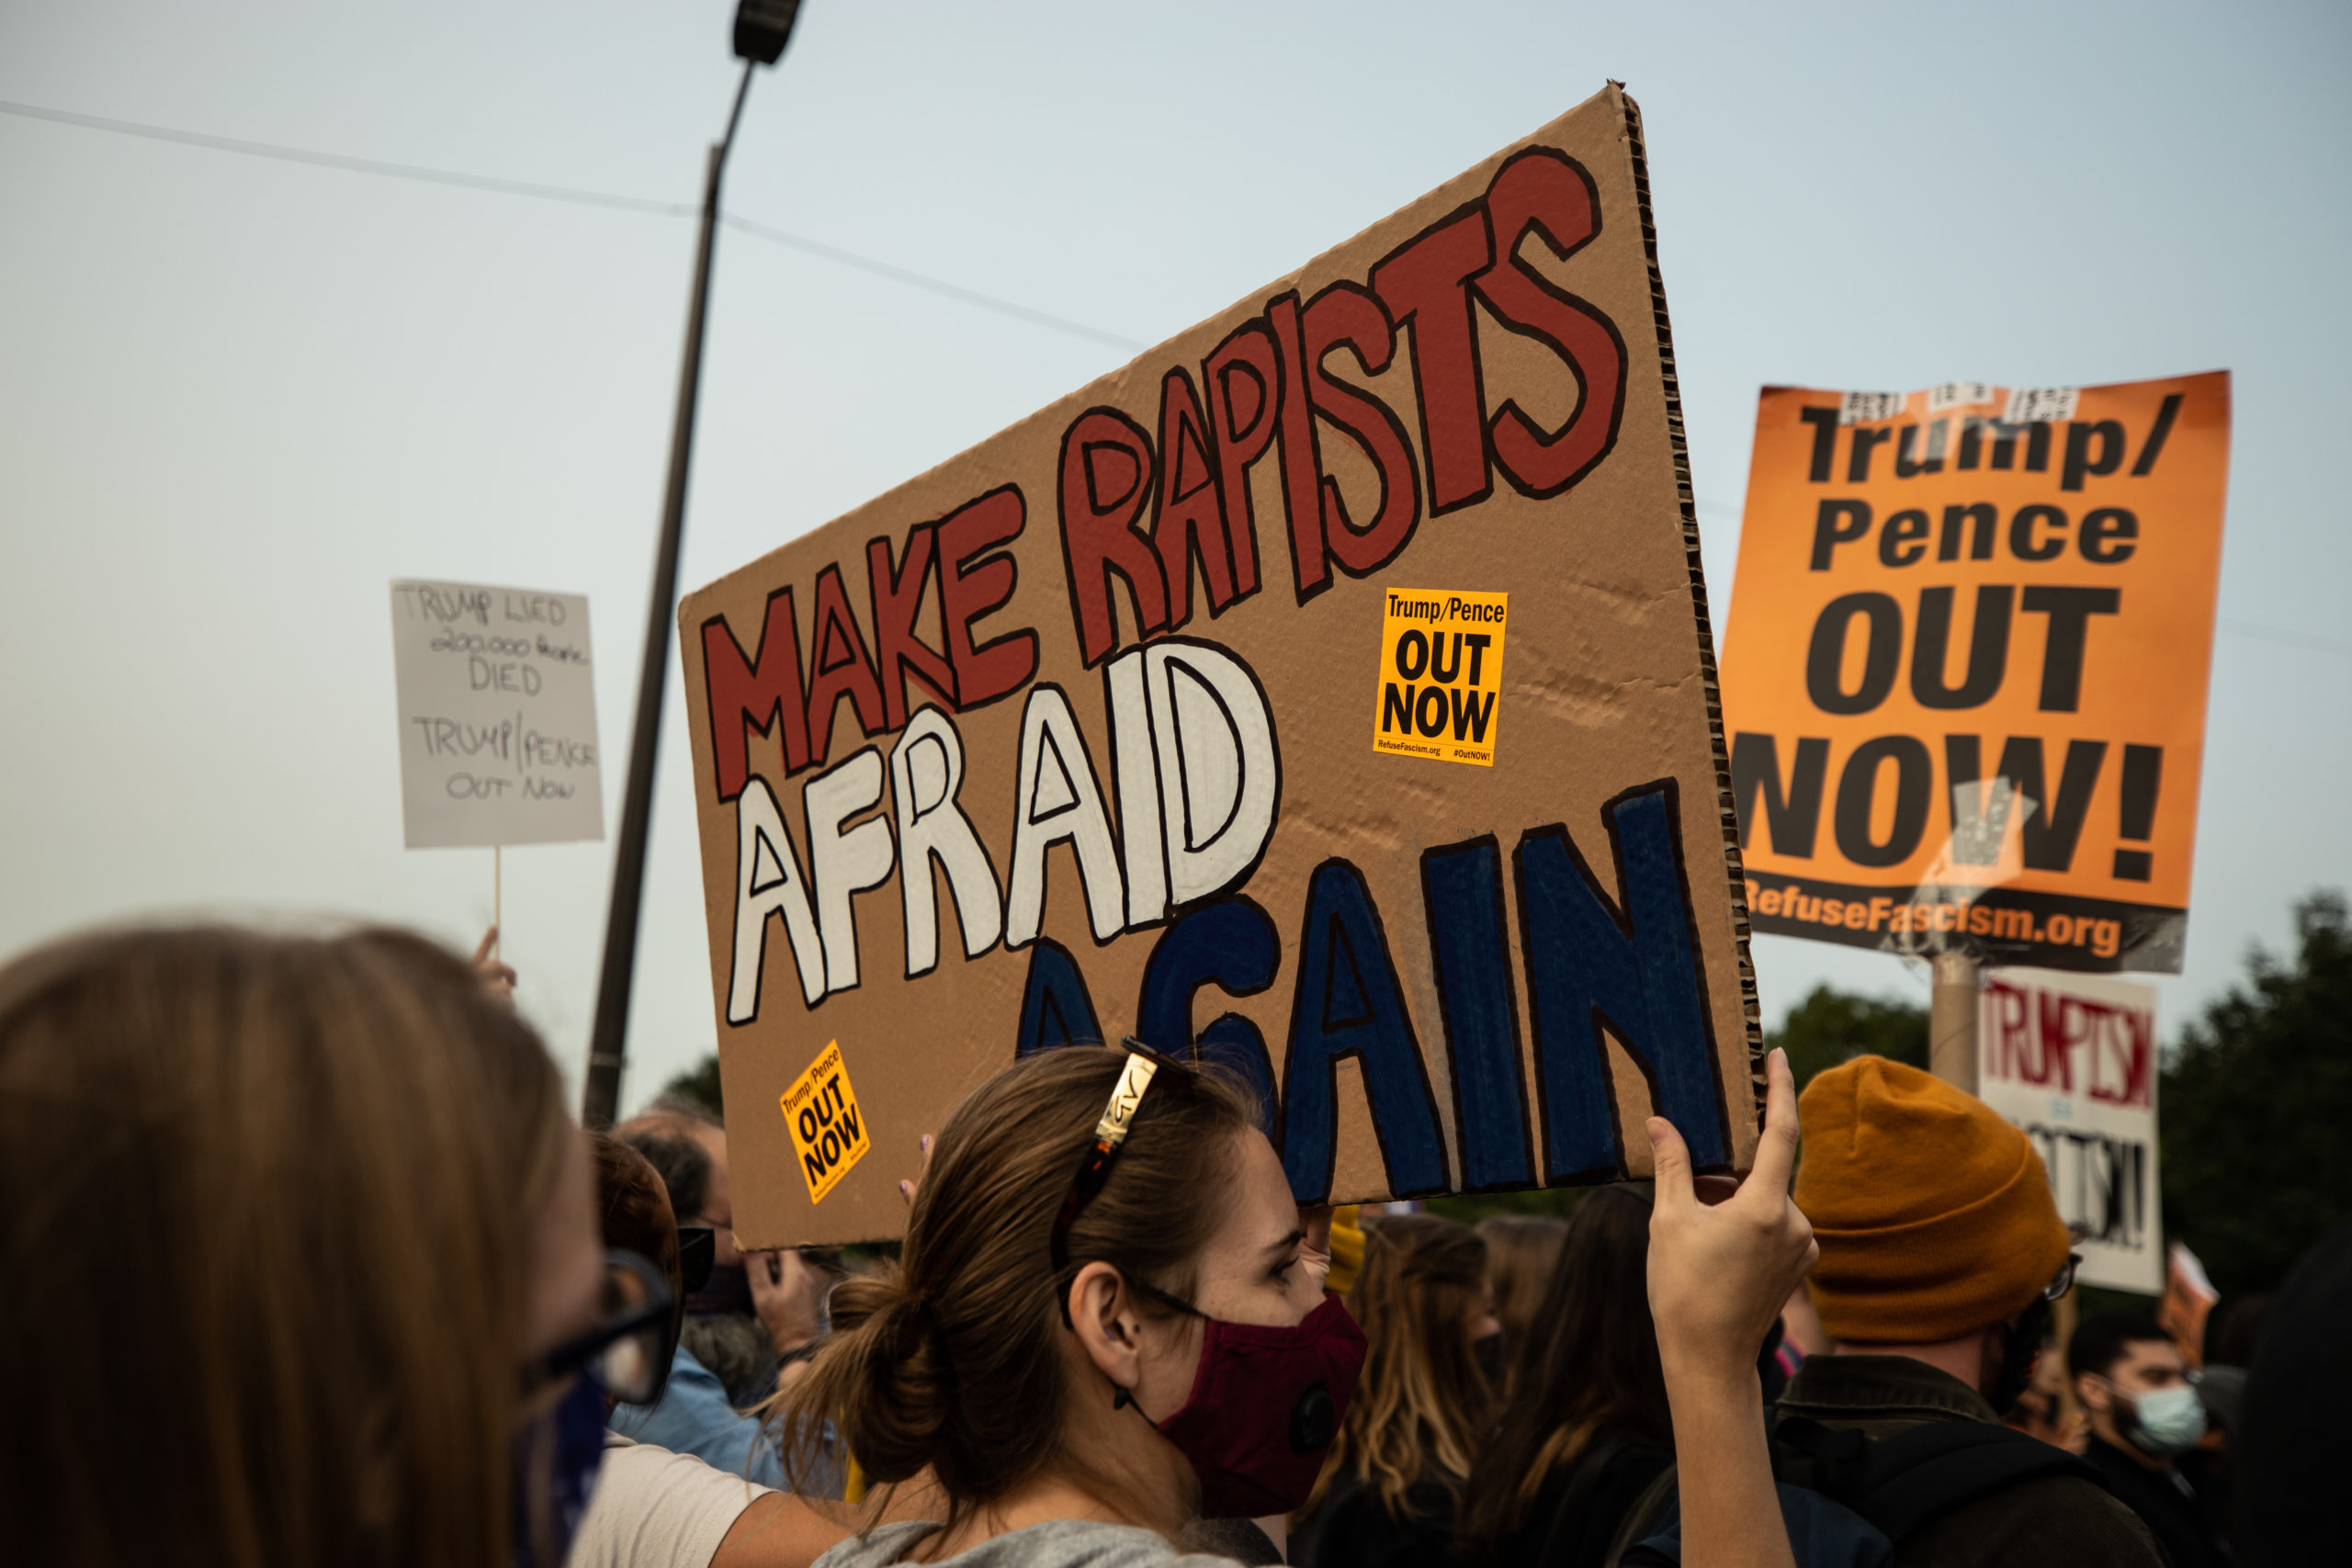 A protester holds a sign saying "make rapists afraid again" in Philadelphia, Pennsylvania on Sept. 15, 2020. (Photo: Kaylee Greenlee / DCNF)